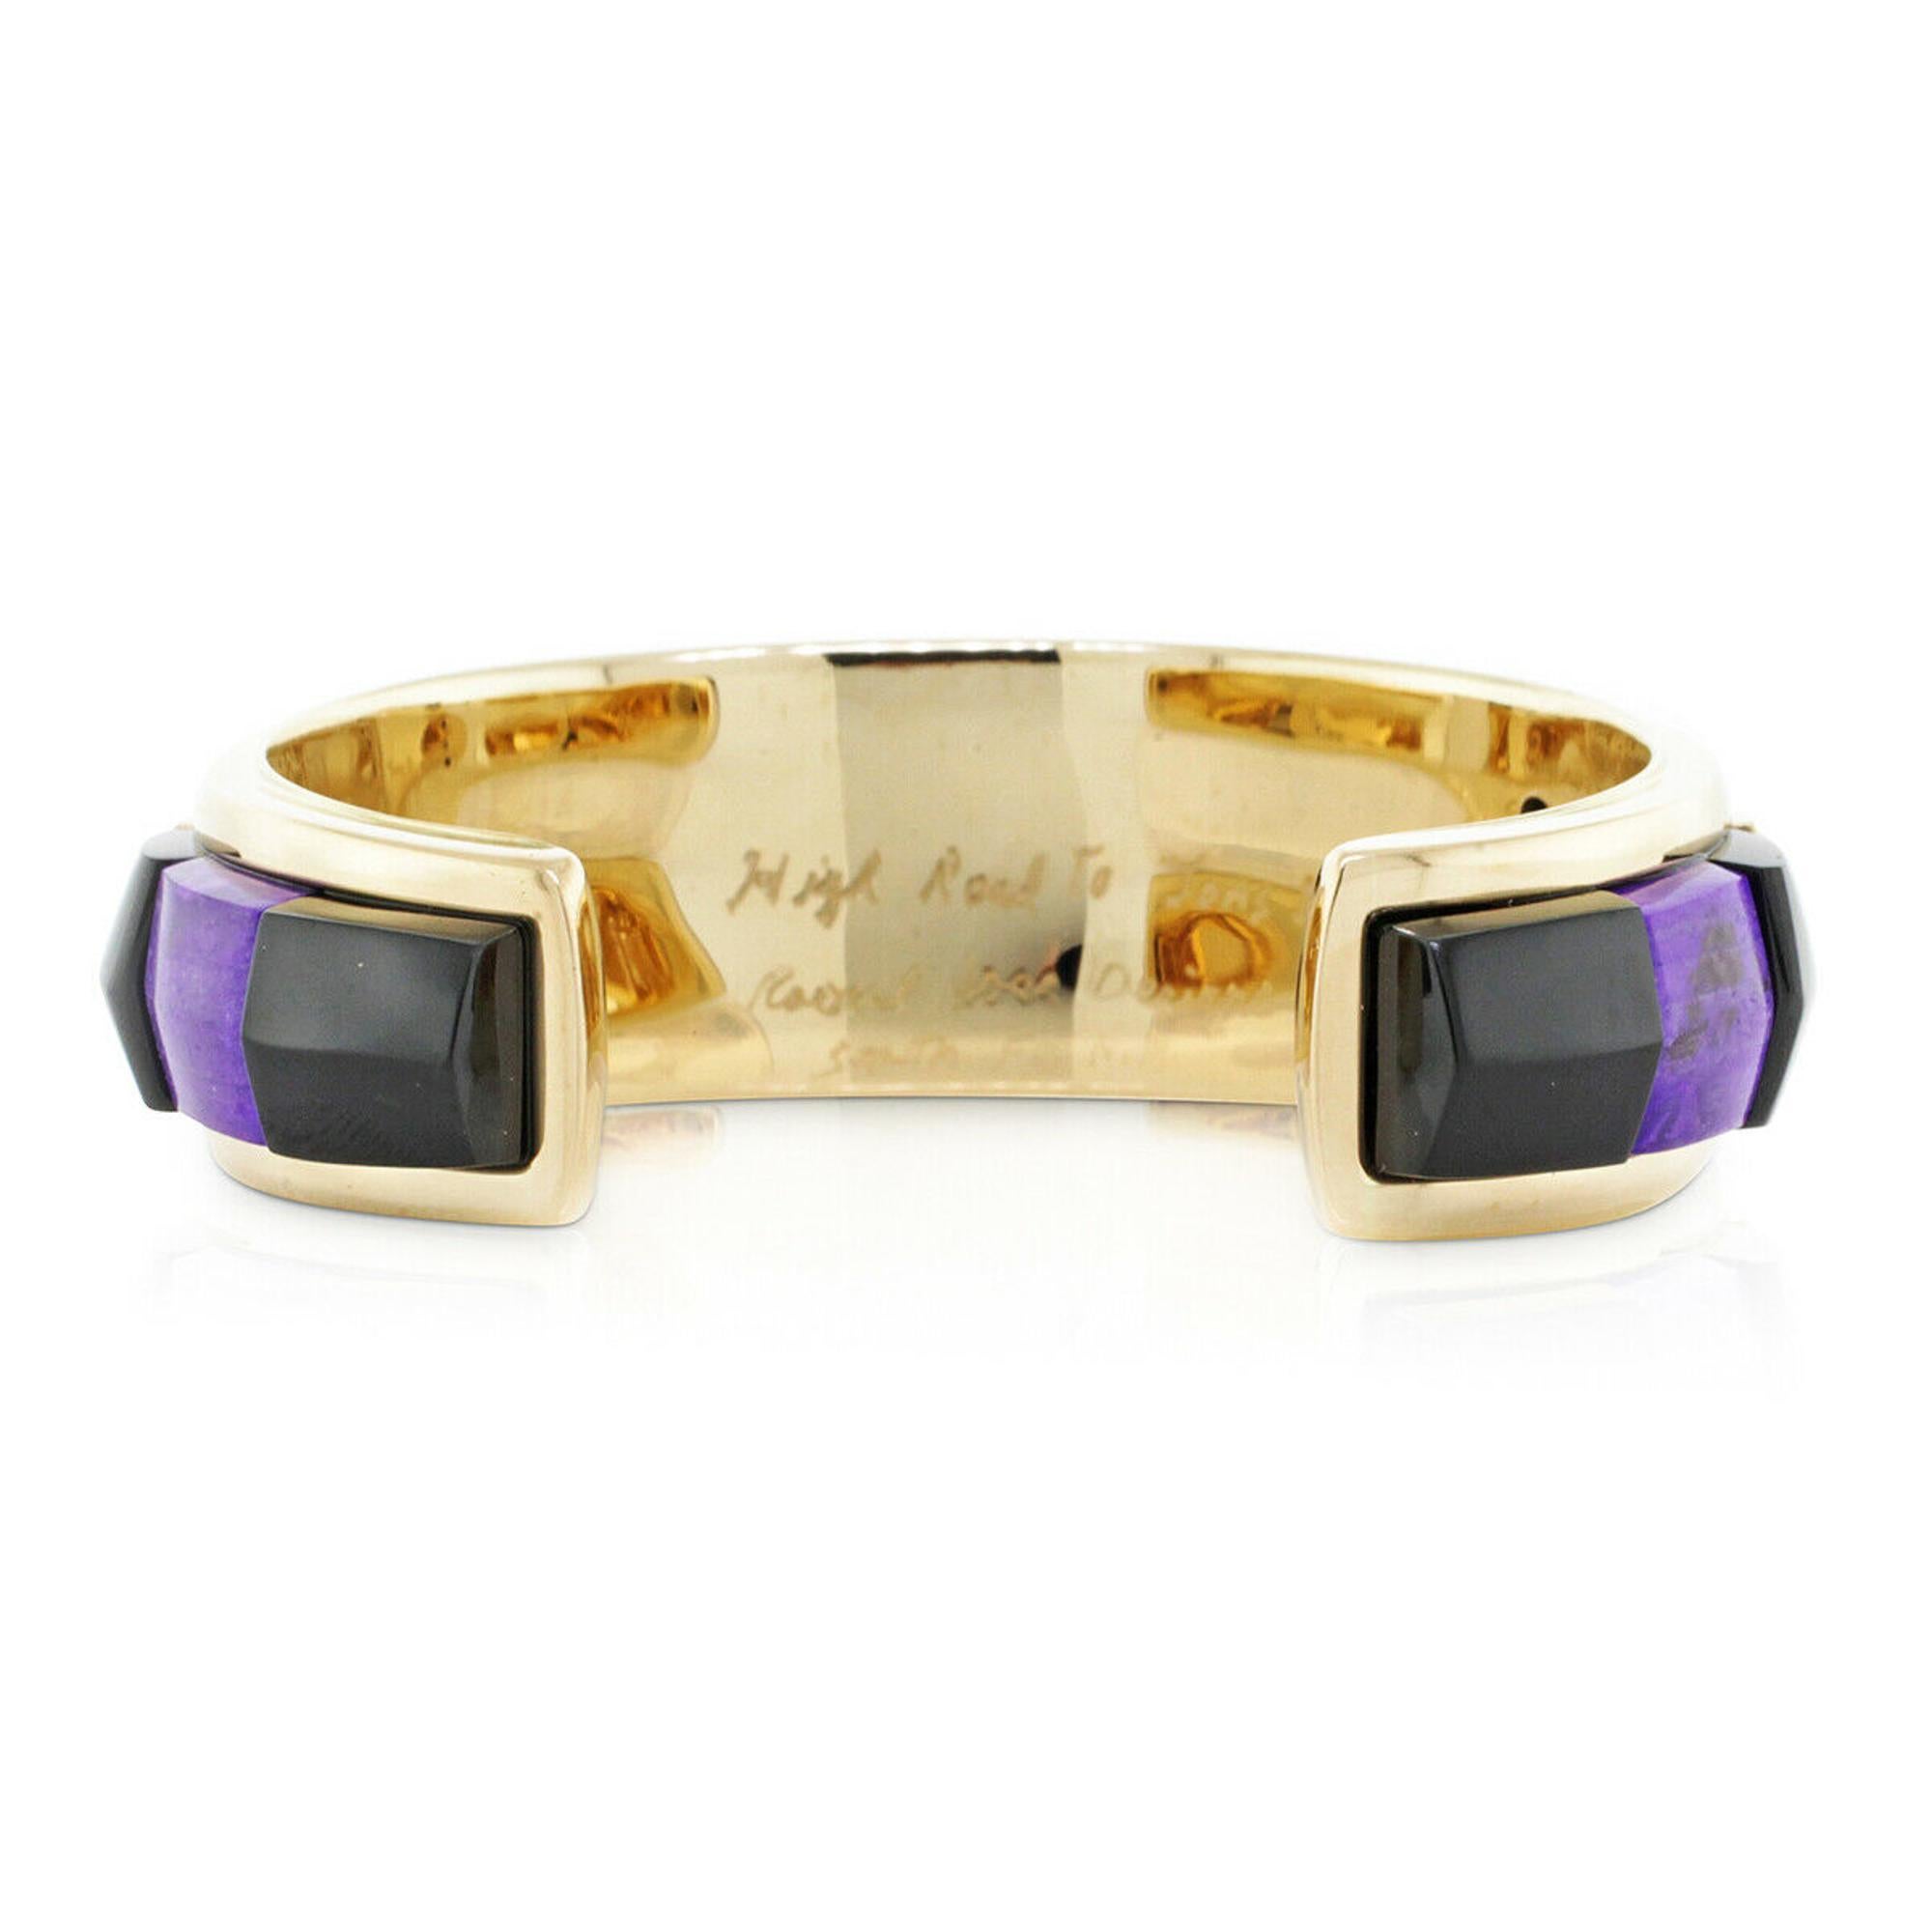 This beautiful bracelet is carefully made using hand-inlaid stones in 14kt yellow gold. This bangle features black jade, fire opal and diamonds. With 3 diamonds weighing 0.24ctw, inserted on the side of the bangle, it feels nice and heavy on the